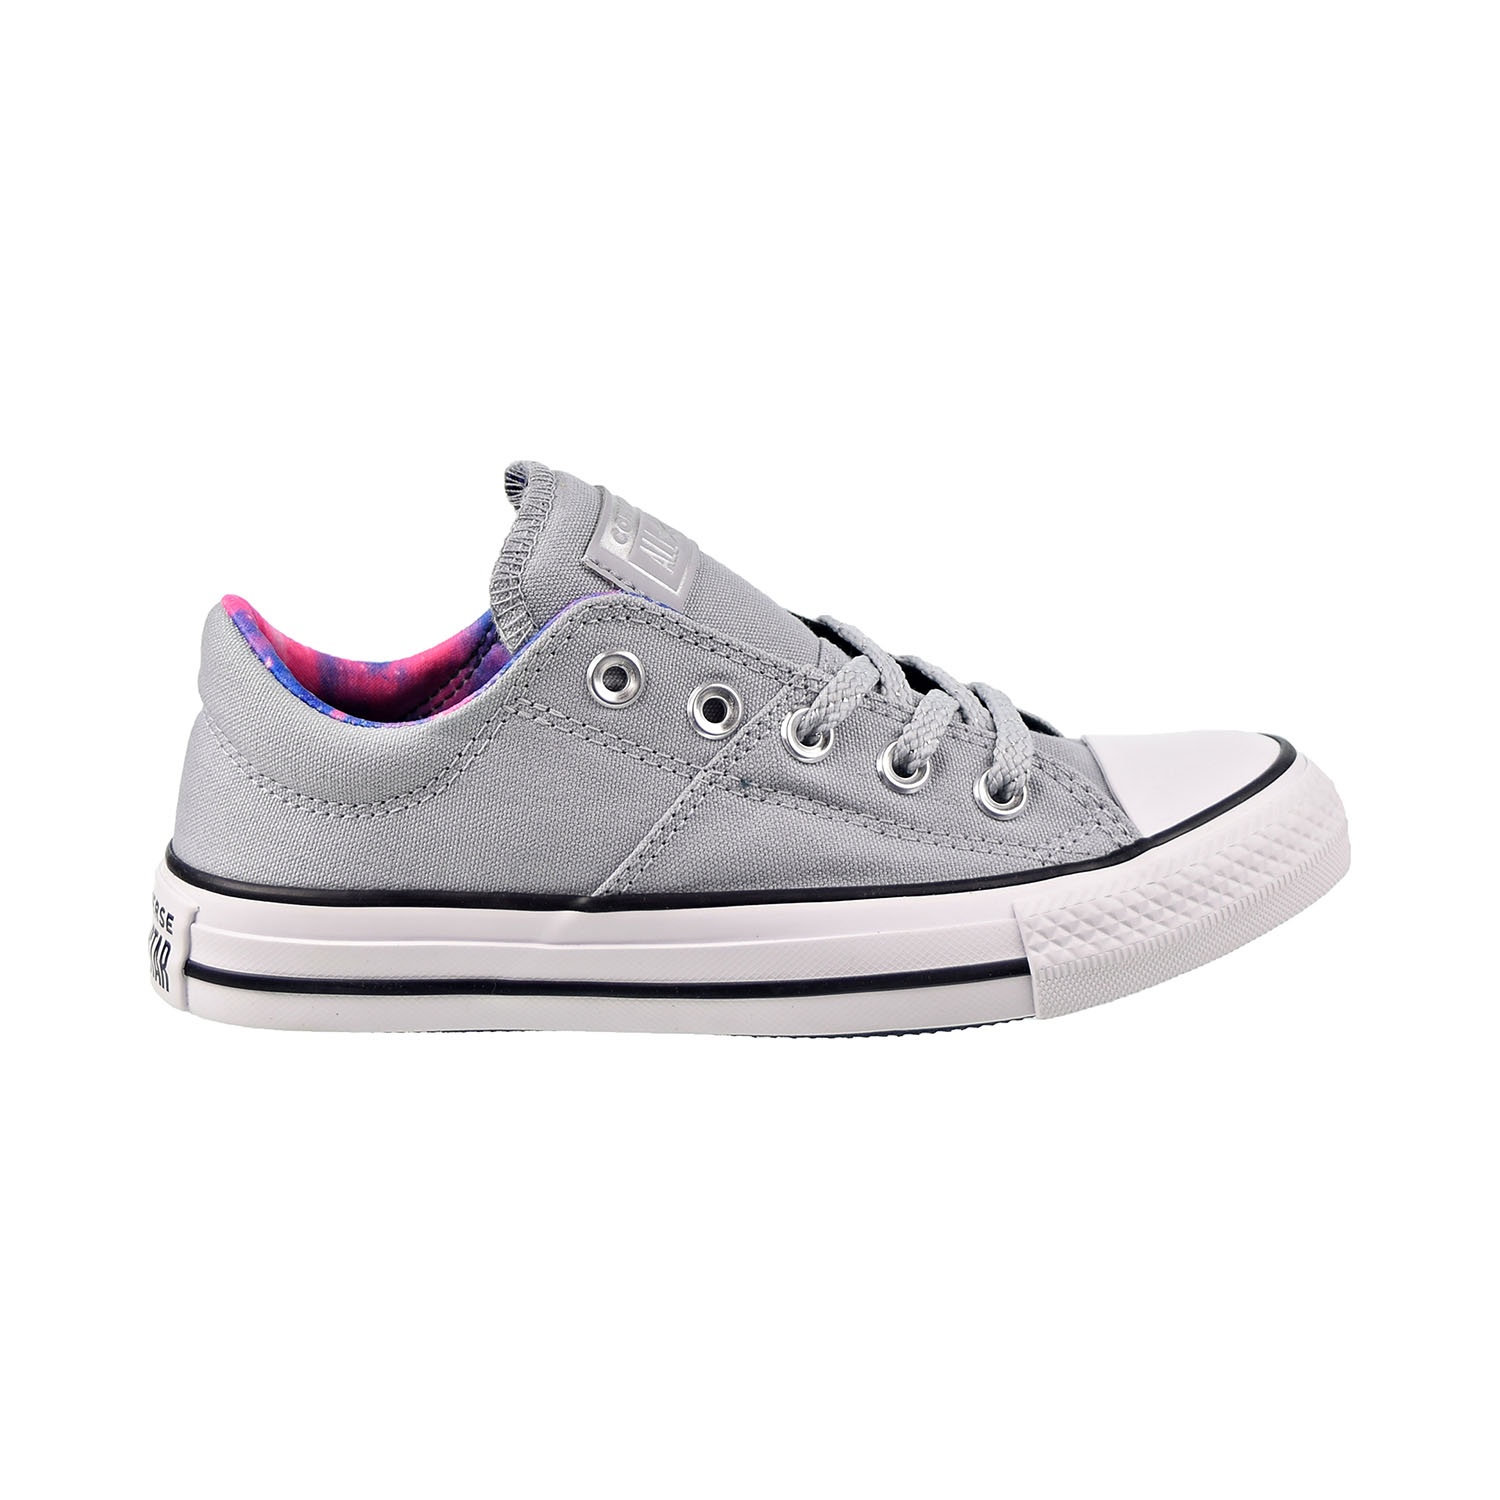 converse chuck taylor all star madison womens sneakers